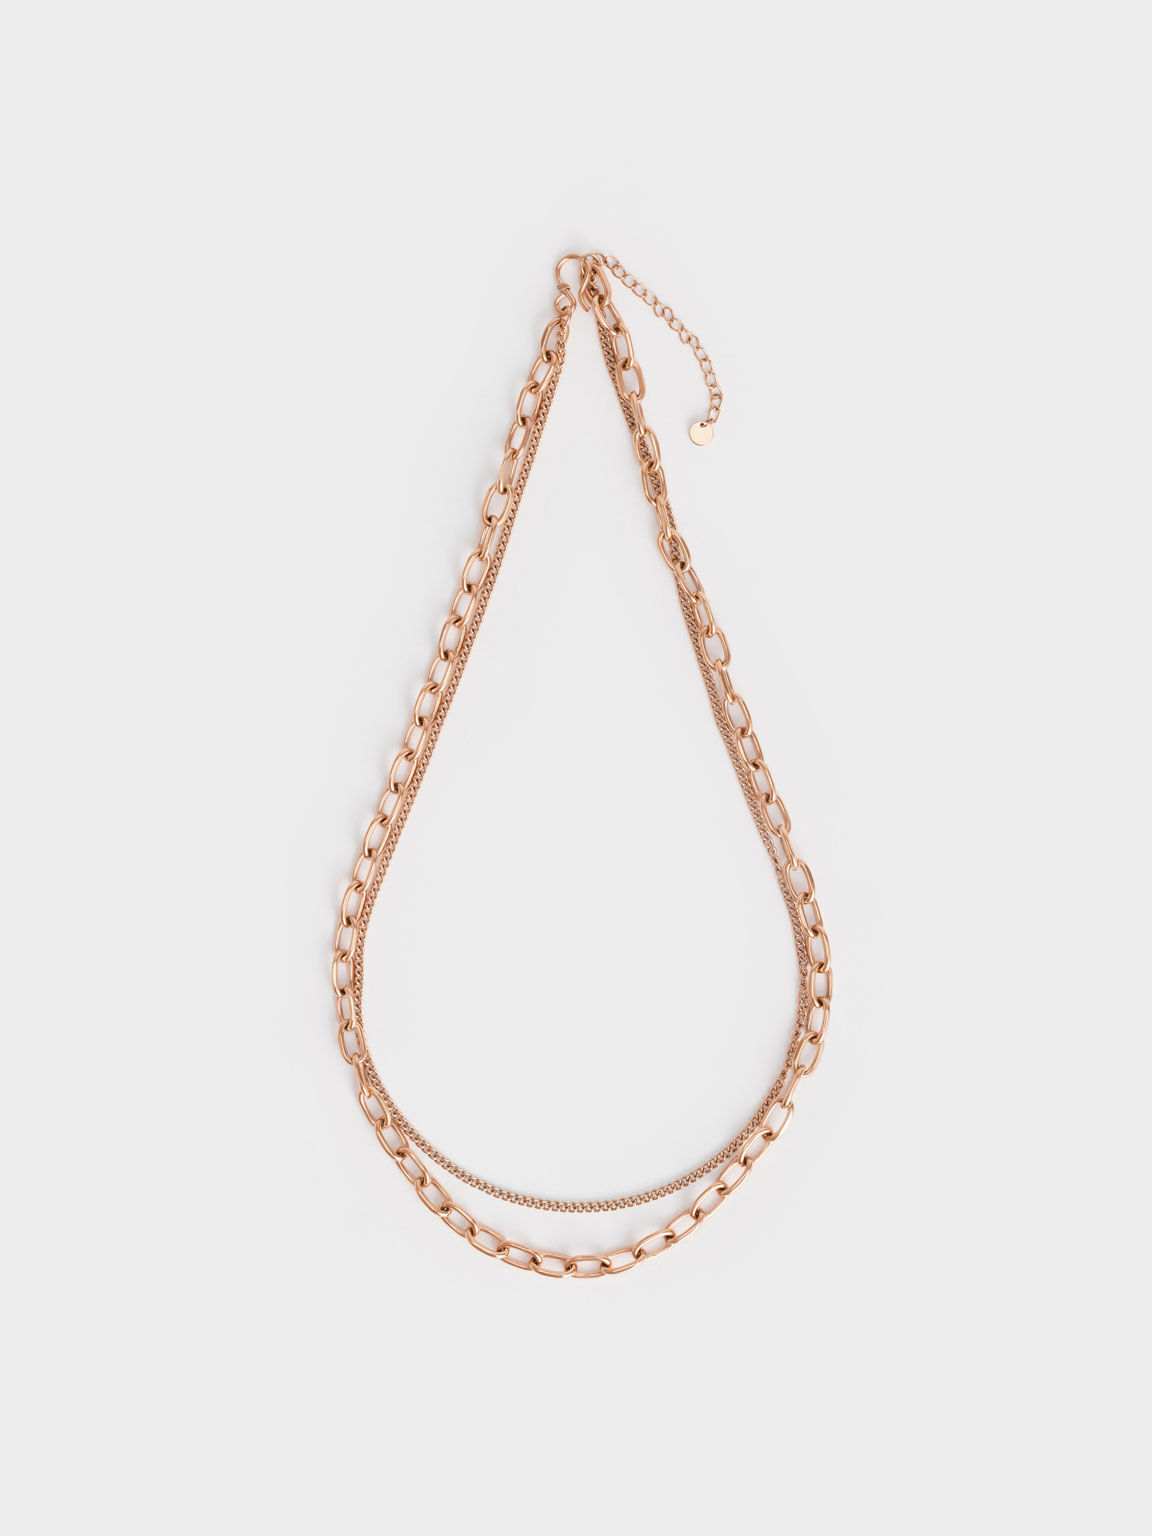 Double Chain Necklace, Rose Gold, hi-res